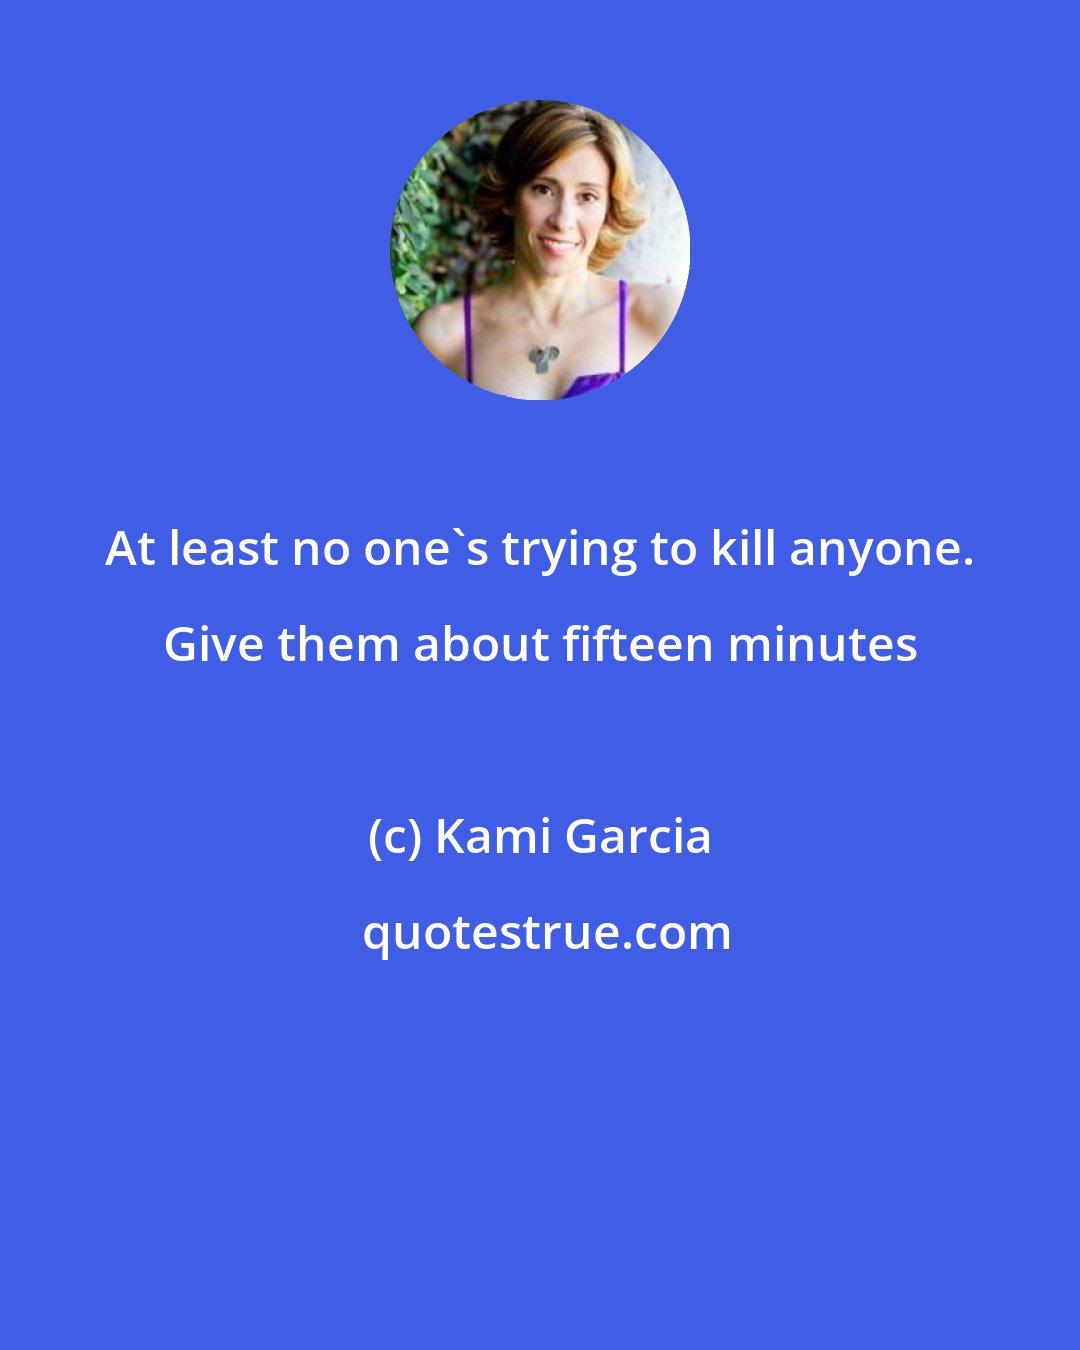 Kami Garcia: At least no one's trying to kill anyone. Give them about fifteen minutes